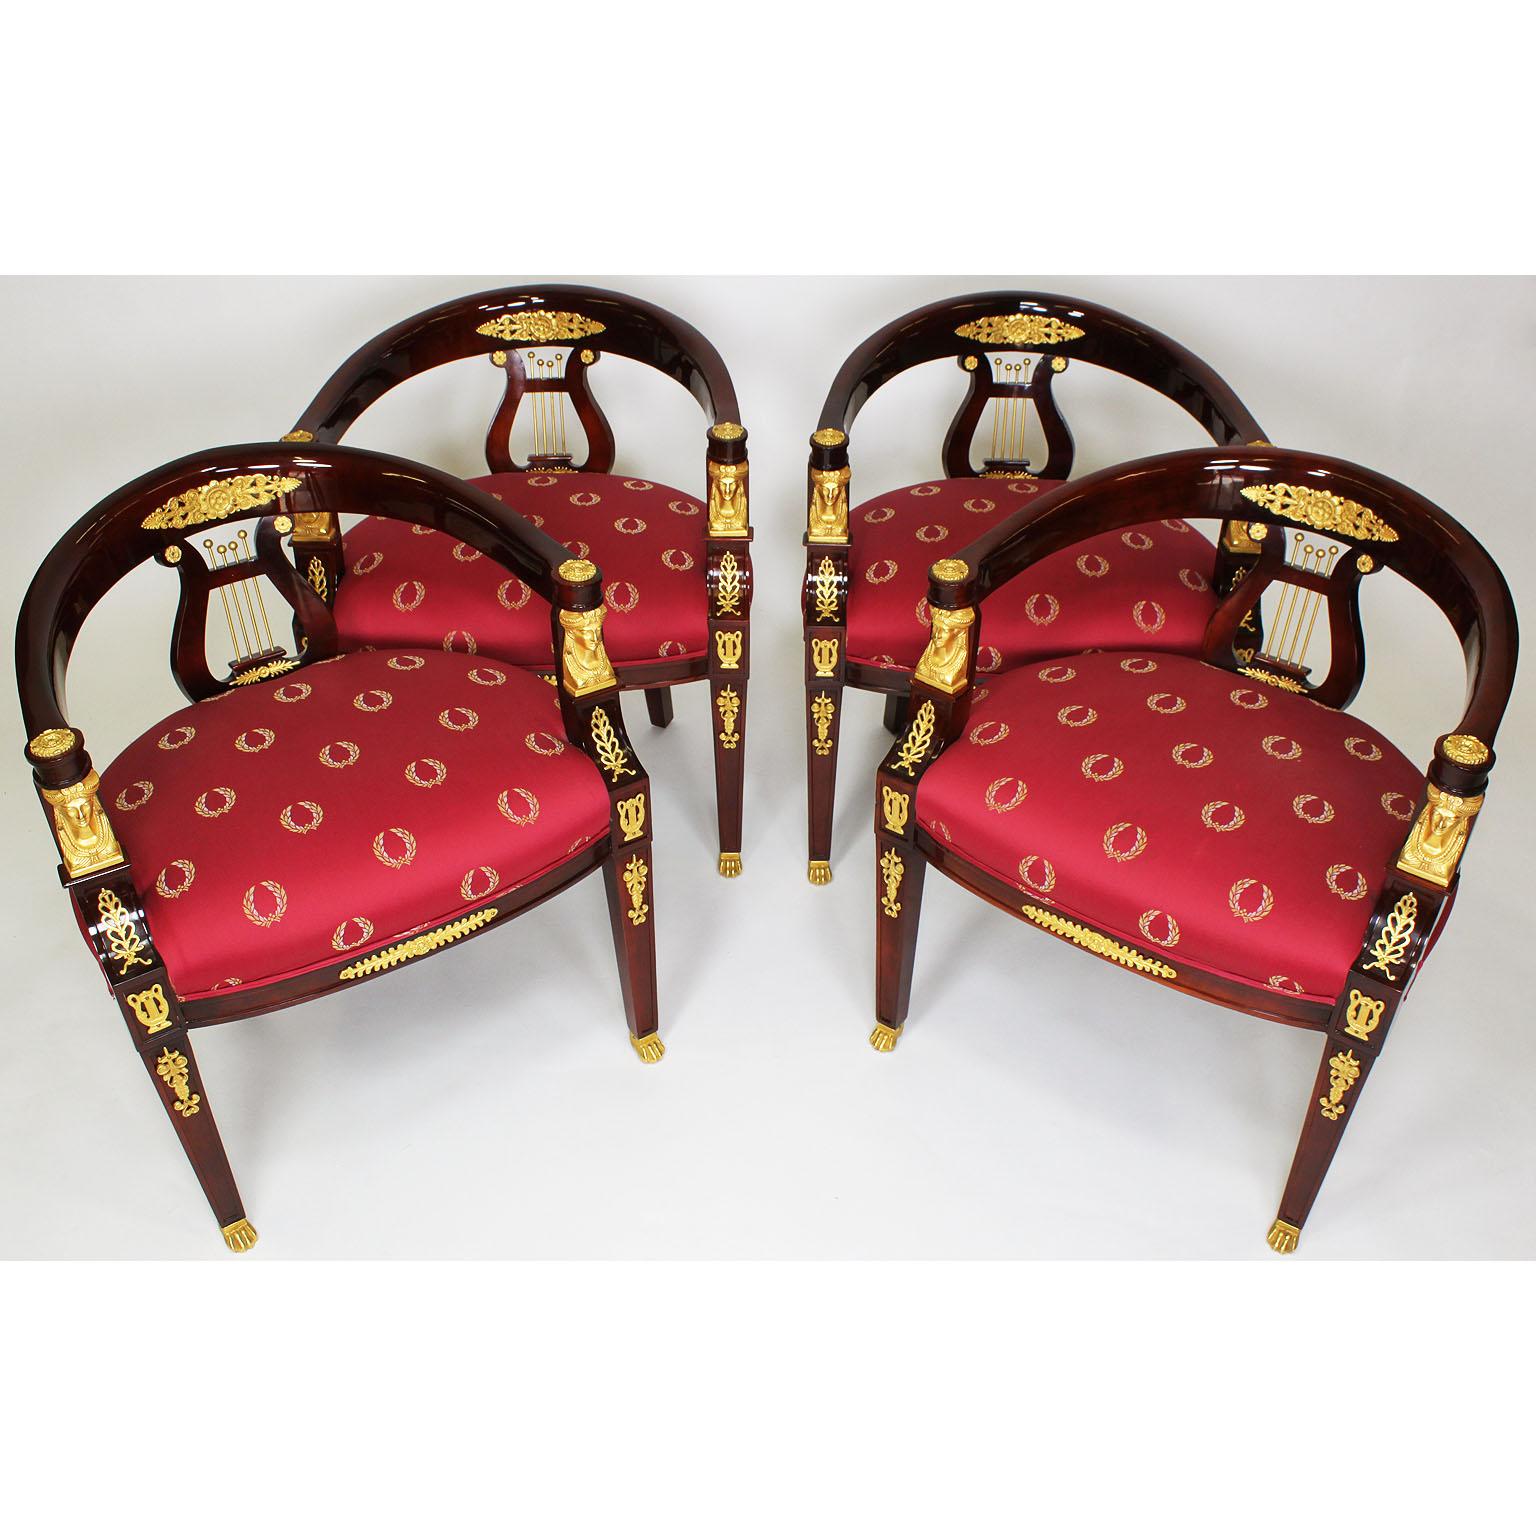 A Pair of French empire revival style mahogany and gilt-bronze mounted horseshoe shaped game armchairs (reproductions). The arched back frames centered with a harp design below a laurel shield, the armrests each flanked by a pair of gilt-bronze